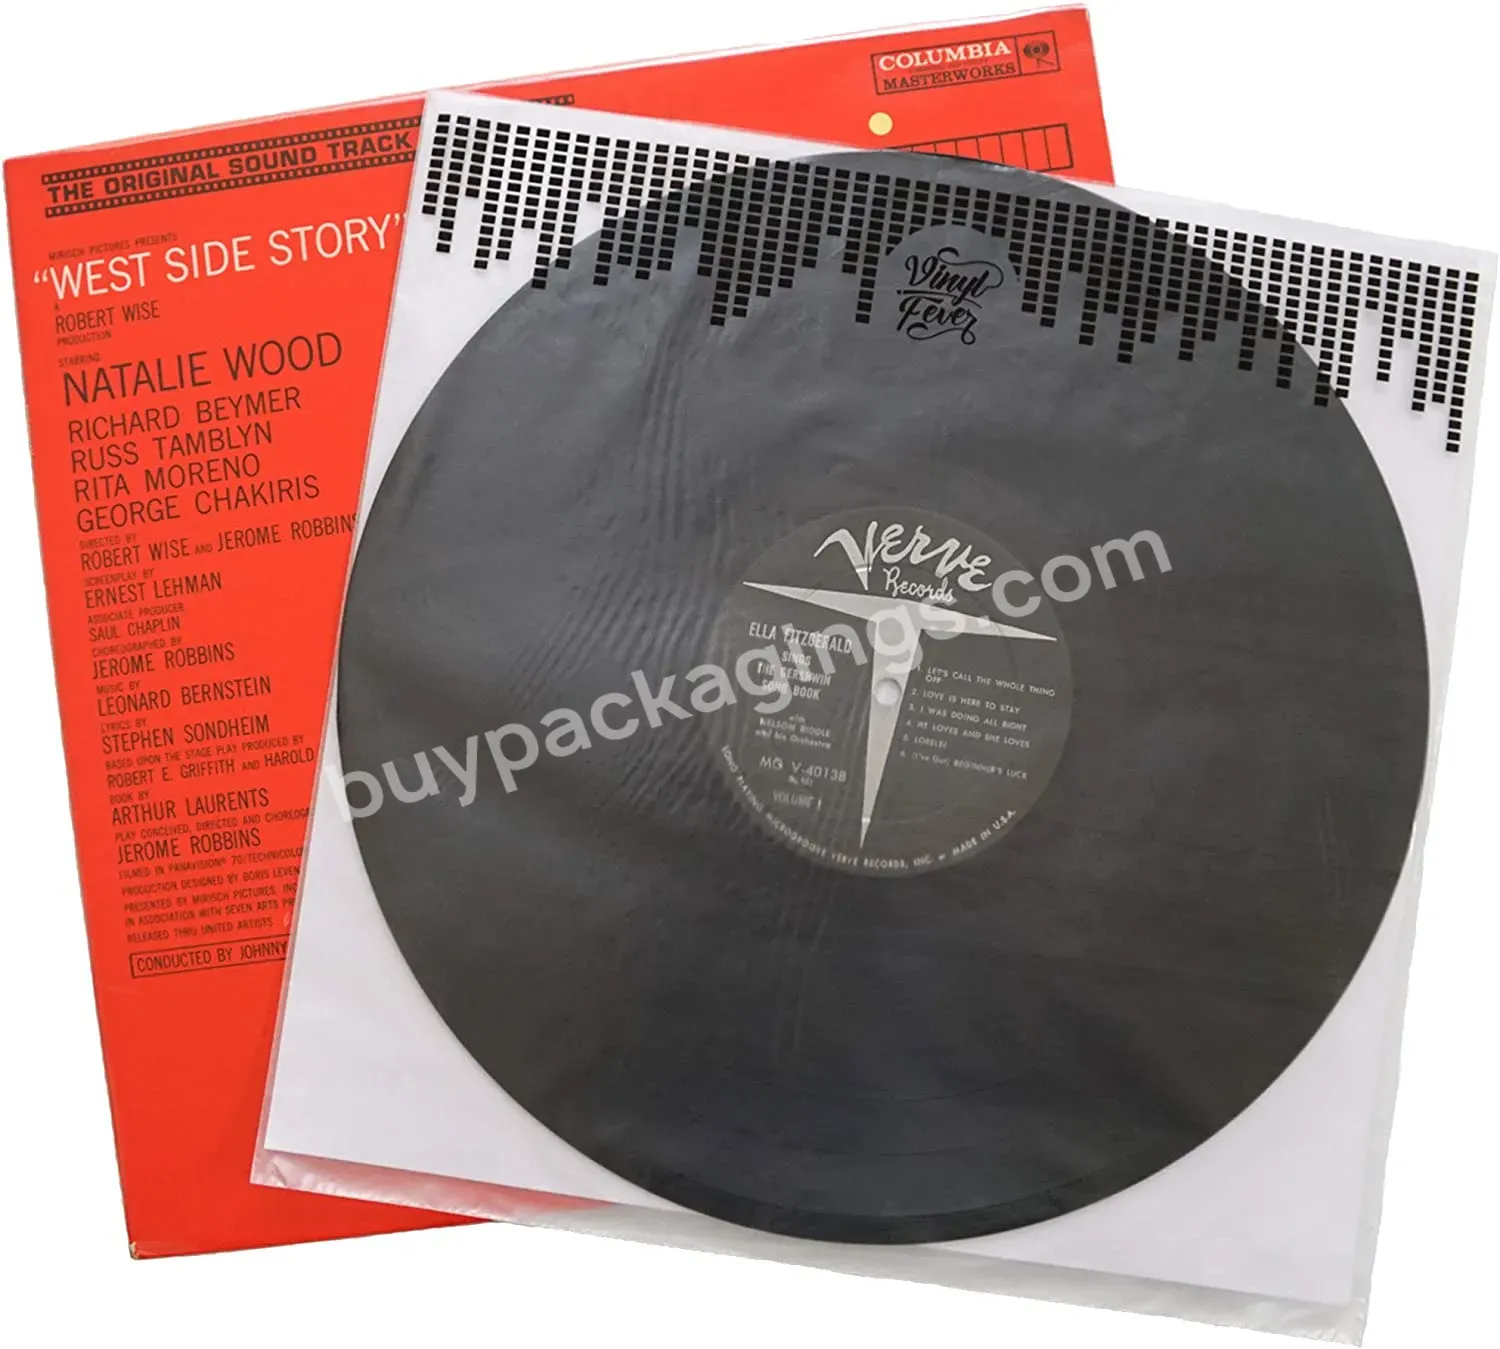 Anti-static- (50pk) Premium Protection Covers Record Inner Sleeves For Your 12" Lp Vinyl Albums Collection - Buy Record Inner Sleeves,Anti-static Inner Record Sleeves,Inner Record Sleeves.